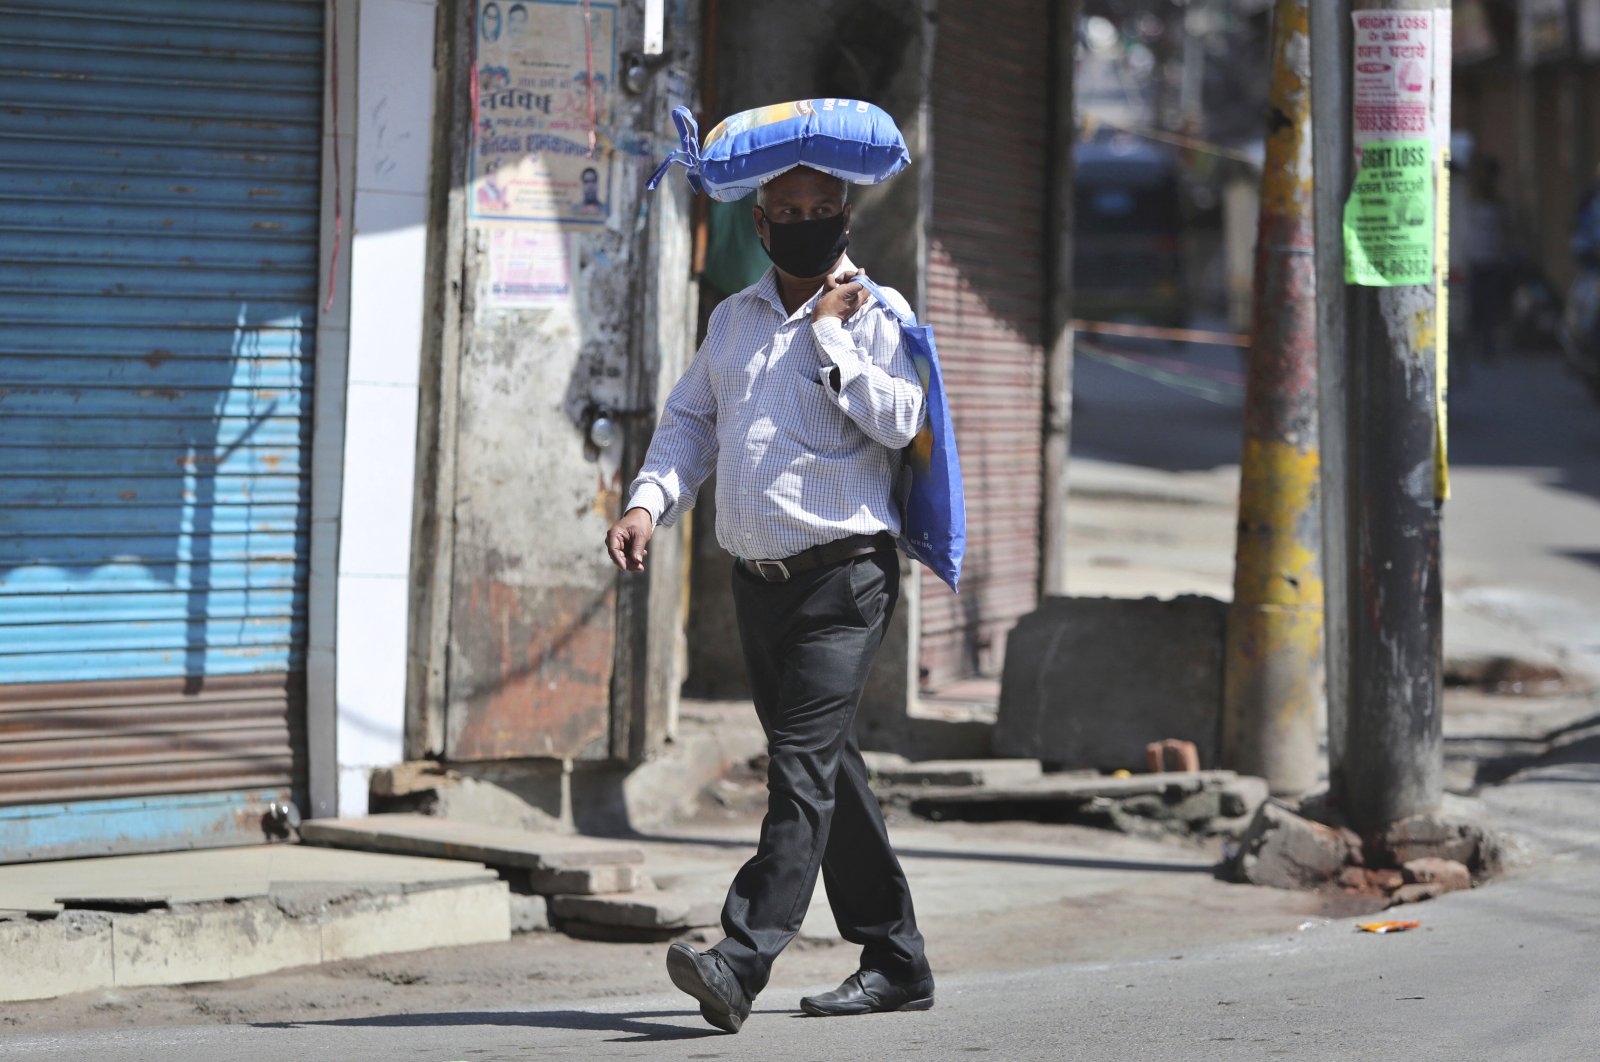 An Indian man, wearing a protective mask as a precaution against coronavirus, carries a bag of rice on his head during restrictions, Jammu, Friday, March 20, 2020. (AP Photo)